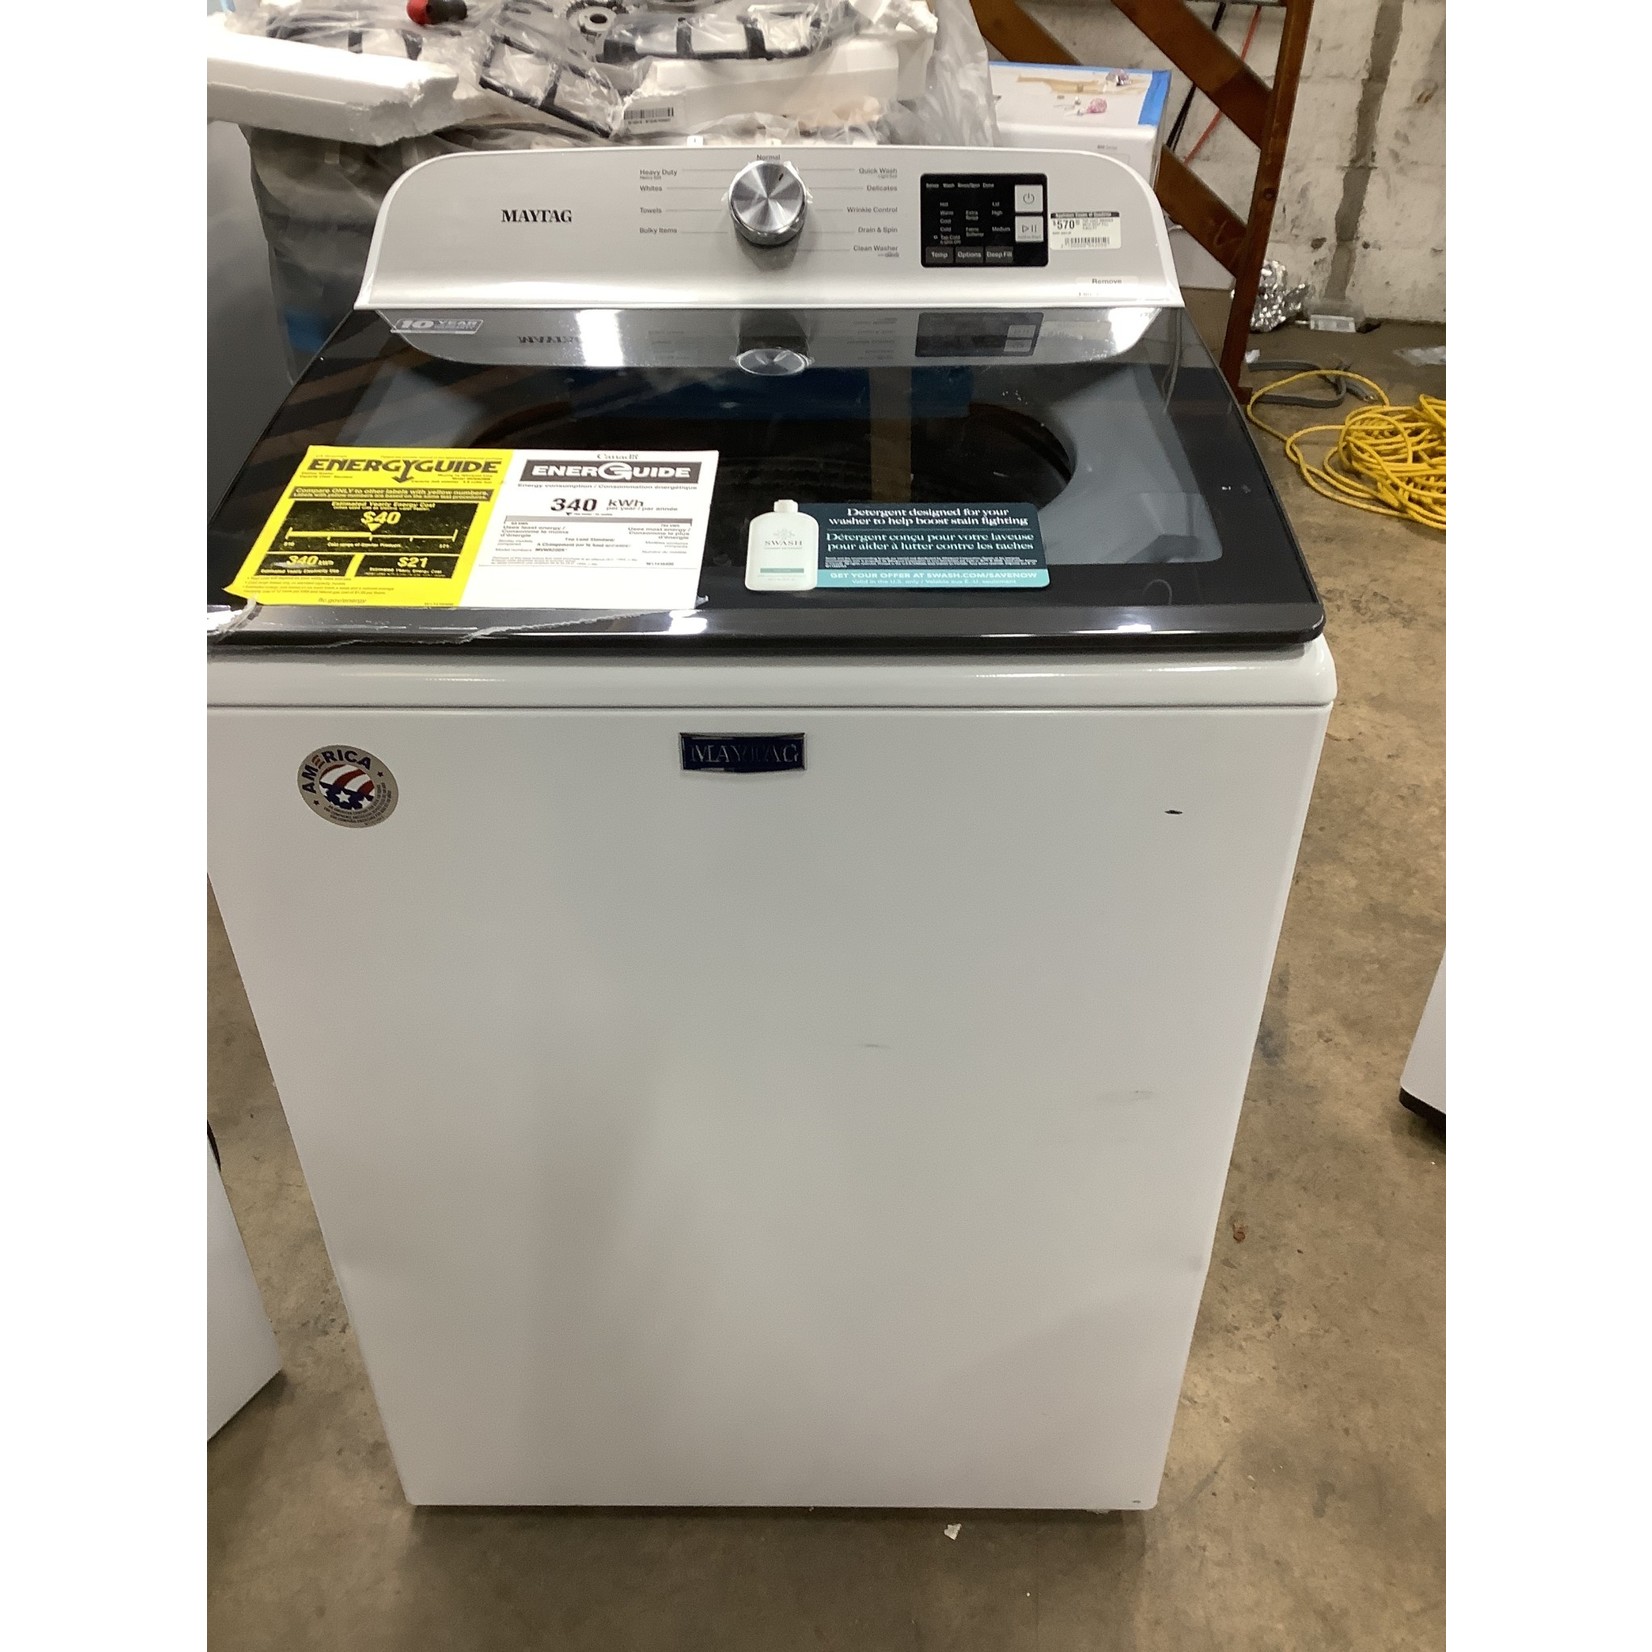 Maytag TOP LOAD WASHER WITH DEEP FILL 4.8CU.FT.